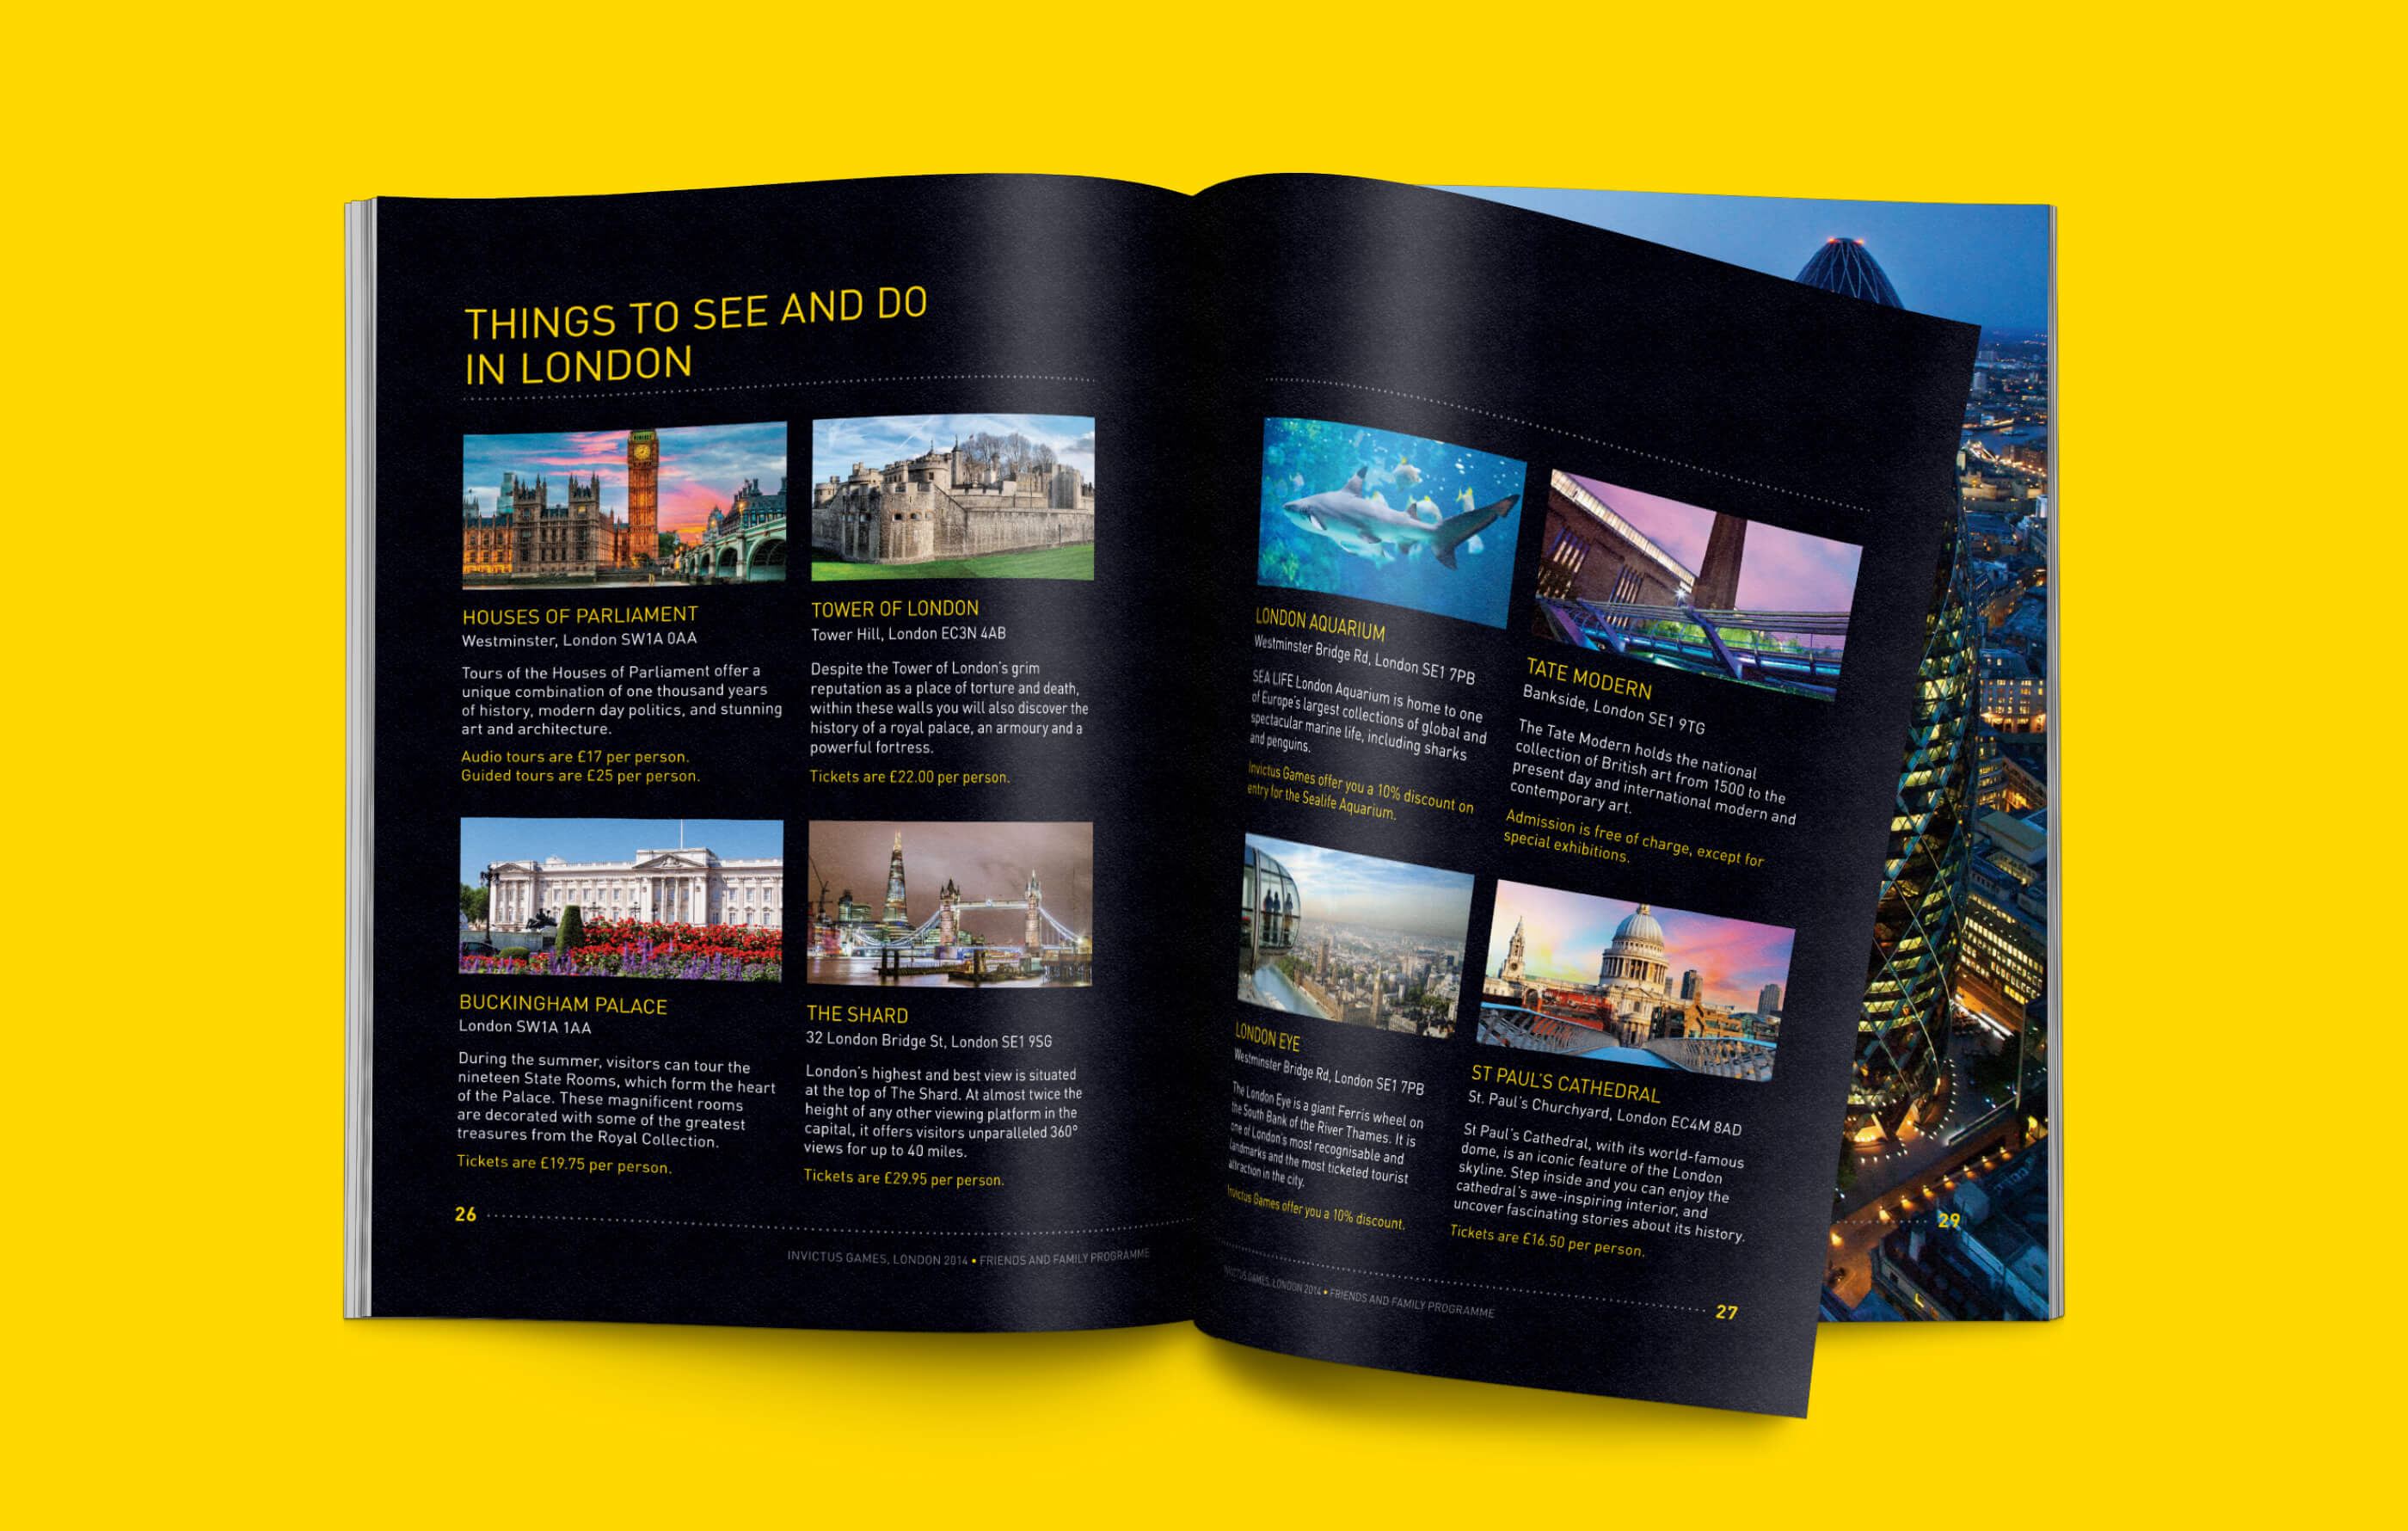 Closing spread of the printed booklet, featuring a list of things to see and do in London